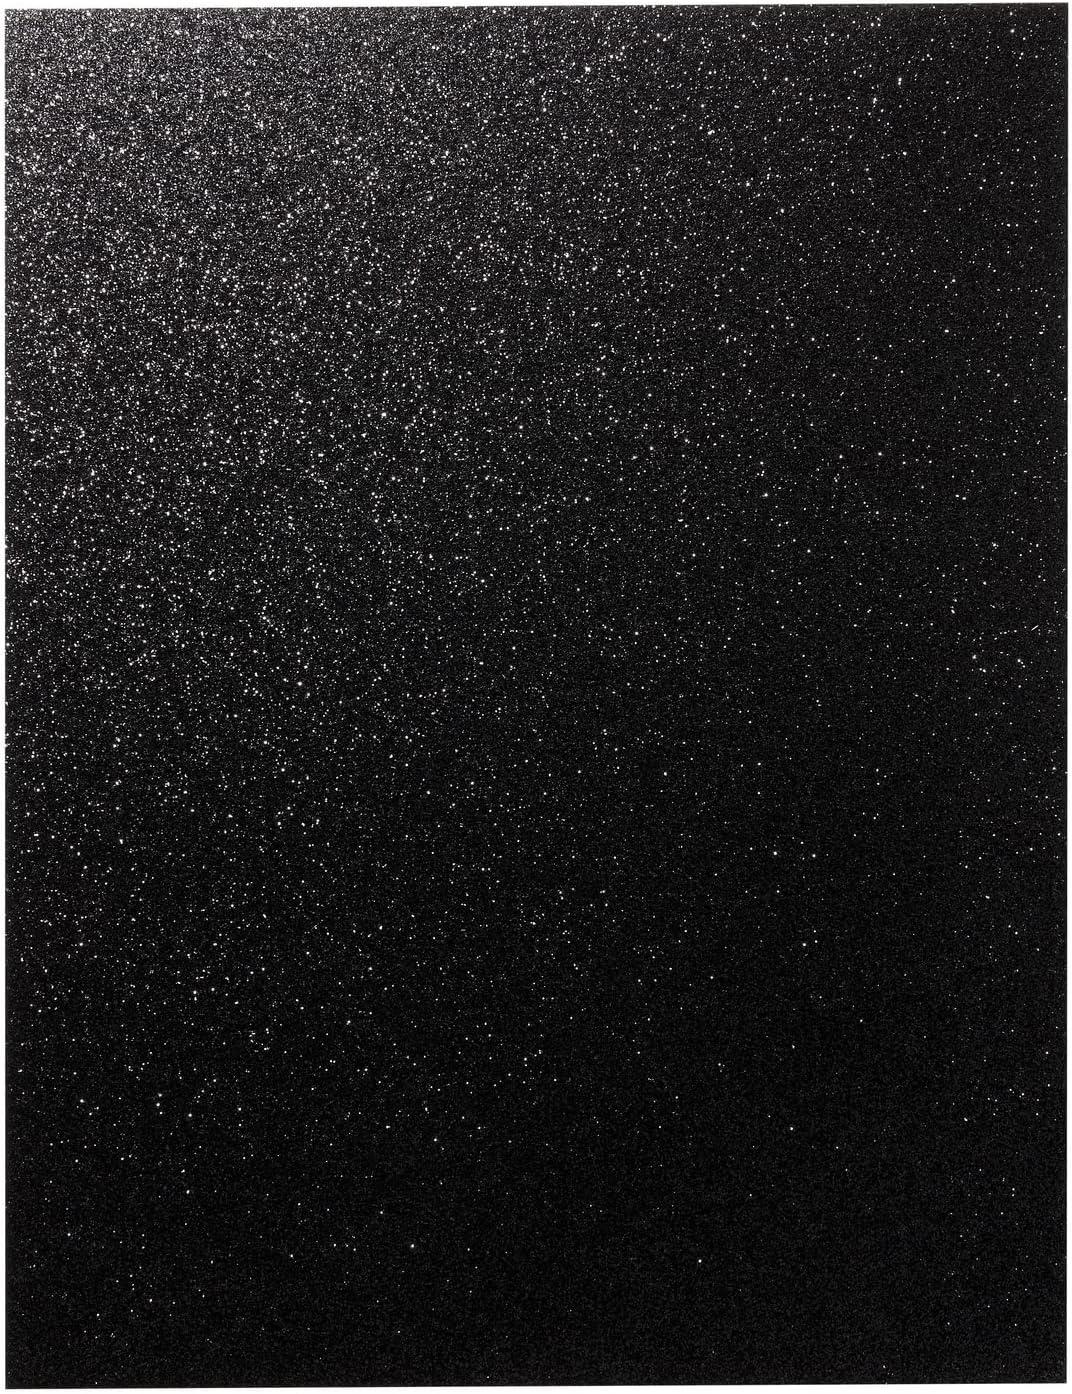 Gondiane 24 sheets Black Cardstock Paper 8.5 x 11 Inches for DIY Cards,  Invitations, Scrapbooking and Other Crafts(250gsm/92lb)